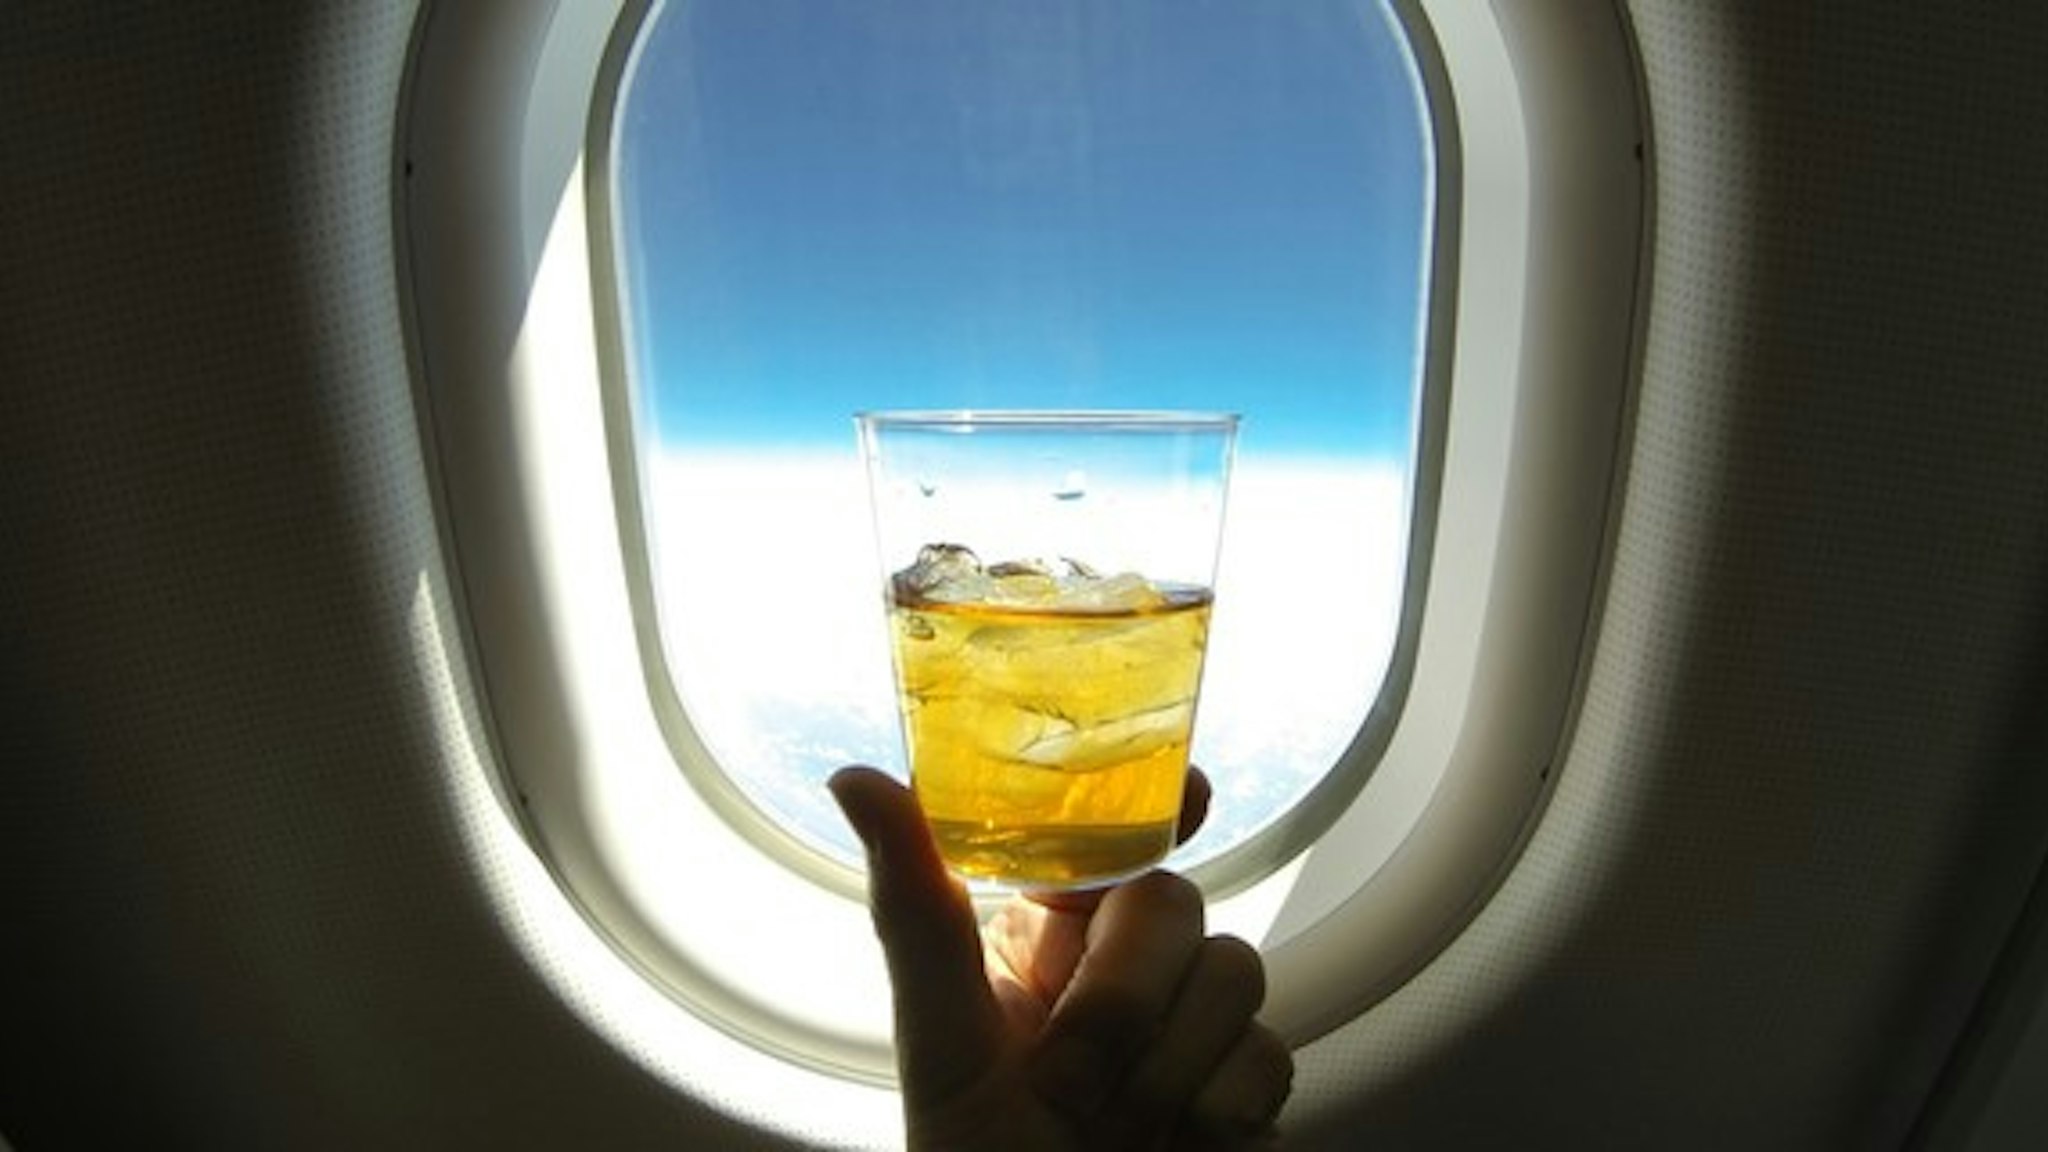 Refreshing glass of ice tea (or alcohol mix) centered on the window of a jumbo airplane, with blue sky above and snowy white clowds below.